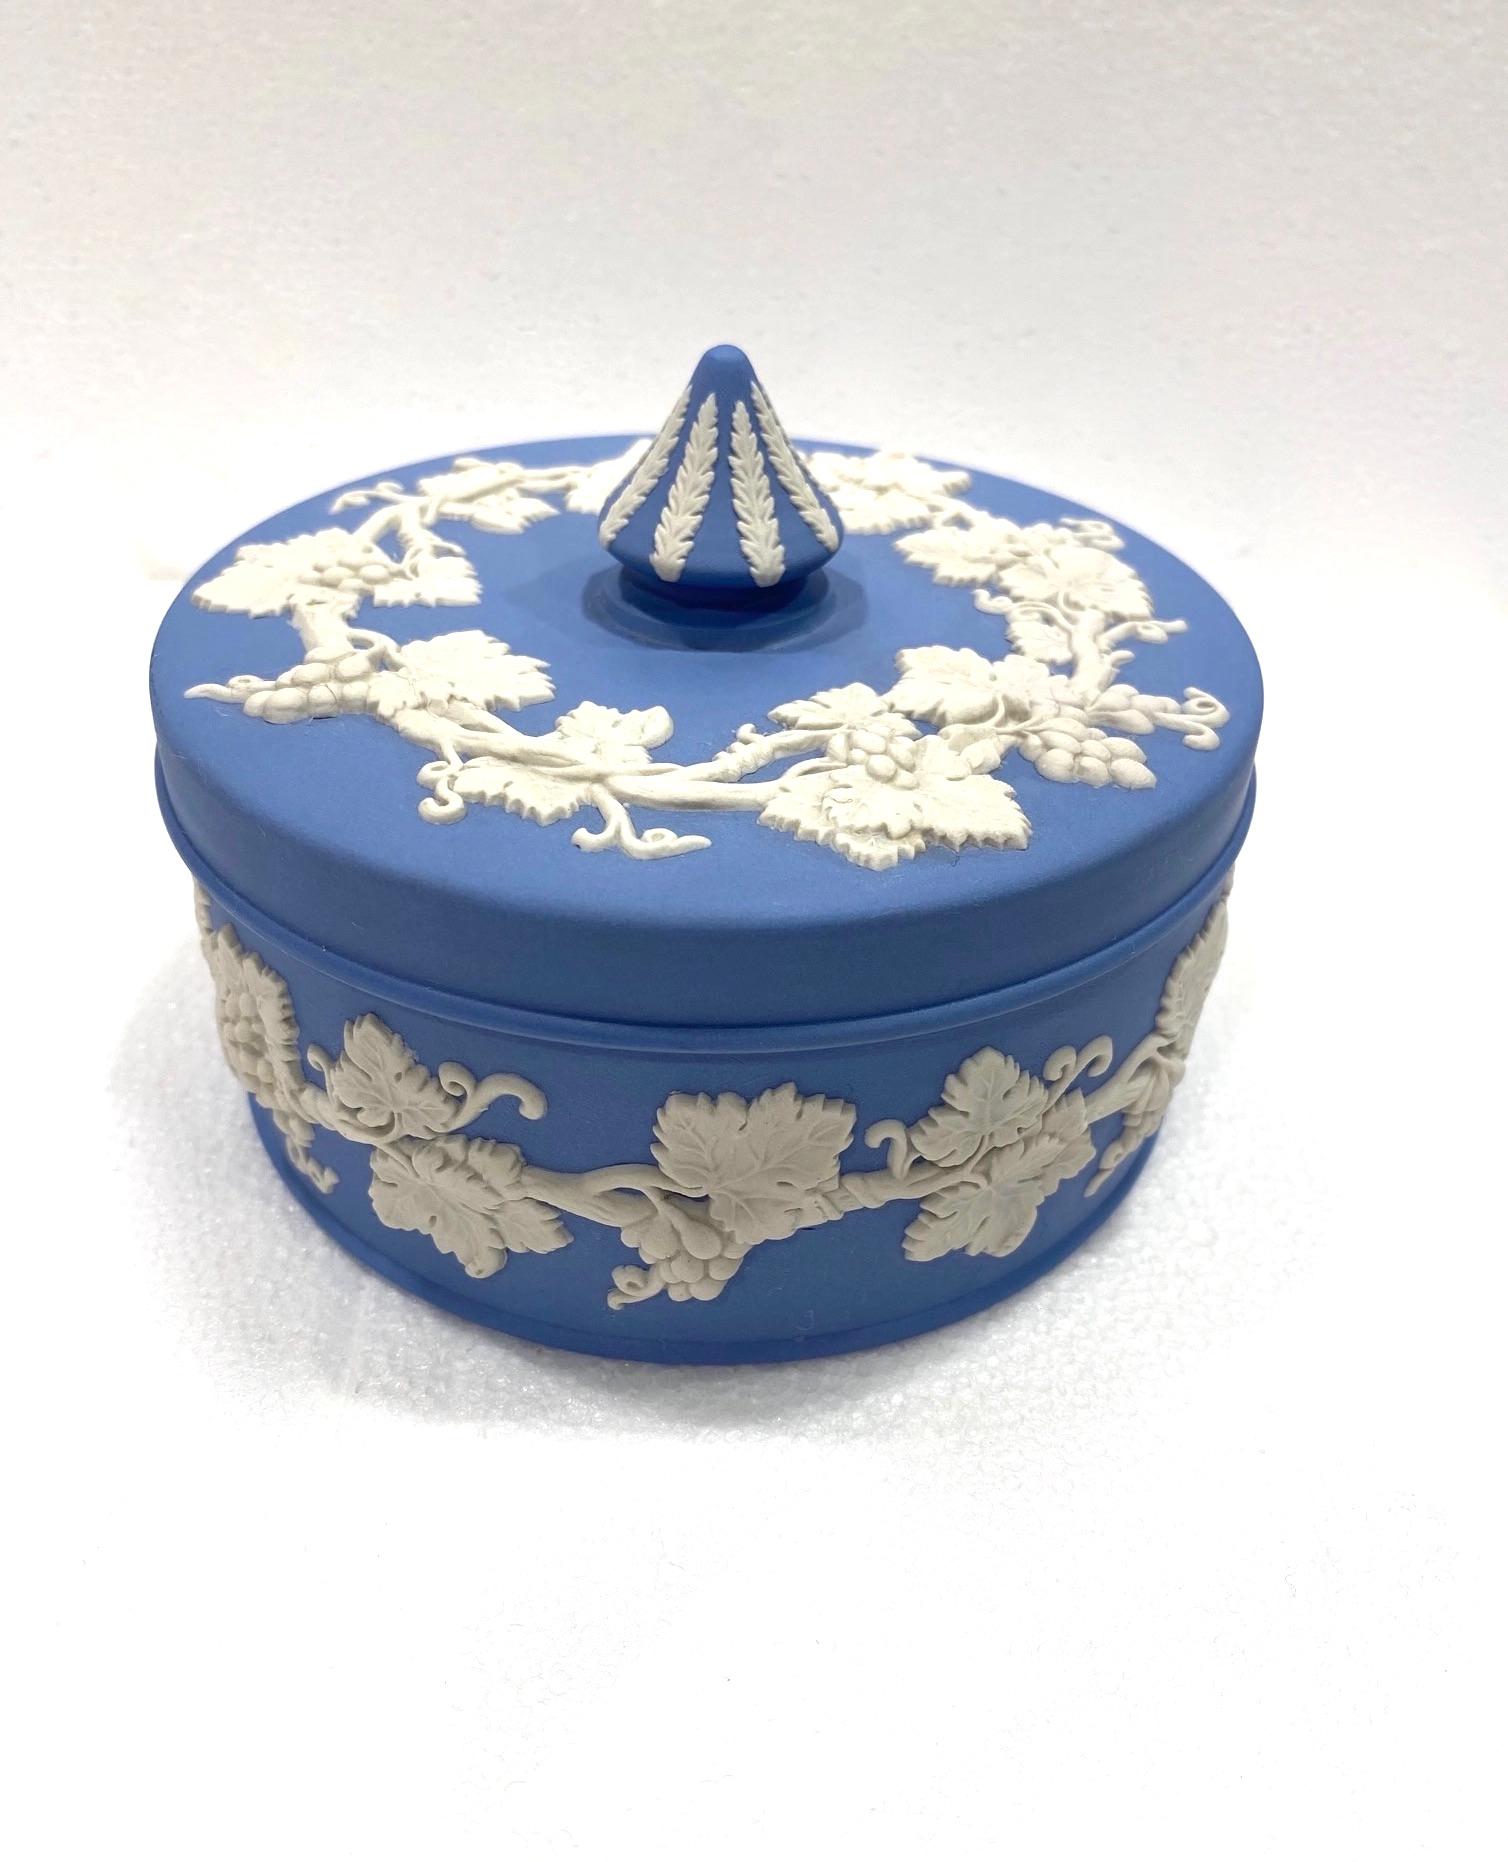 English porcelain box by Wedgwood from the jasperware pottery series. The lidded box features a matte biscuit or unglazed finish in blue with decorative relief work in contrasting white porcelain. The Neoclassical relief work has a foliage stem and